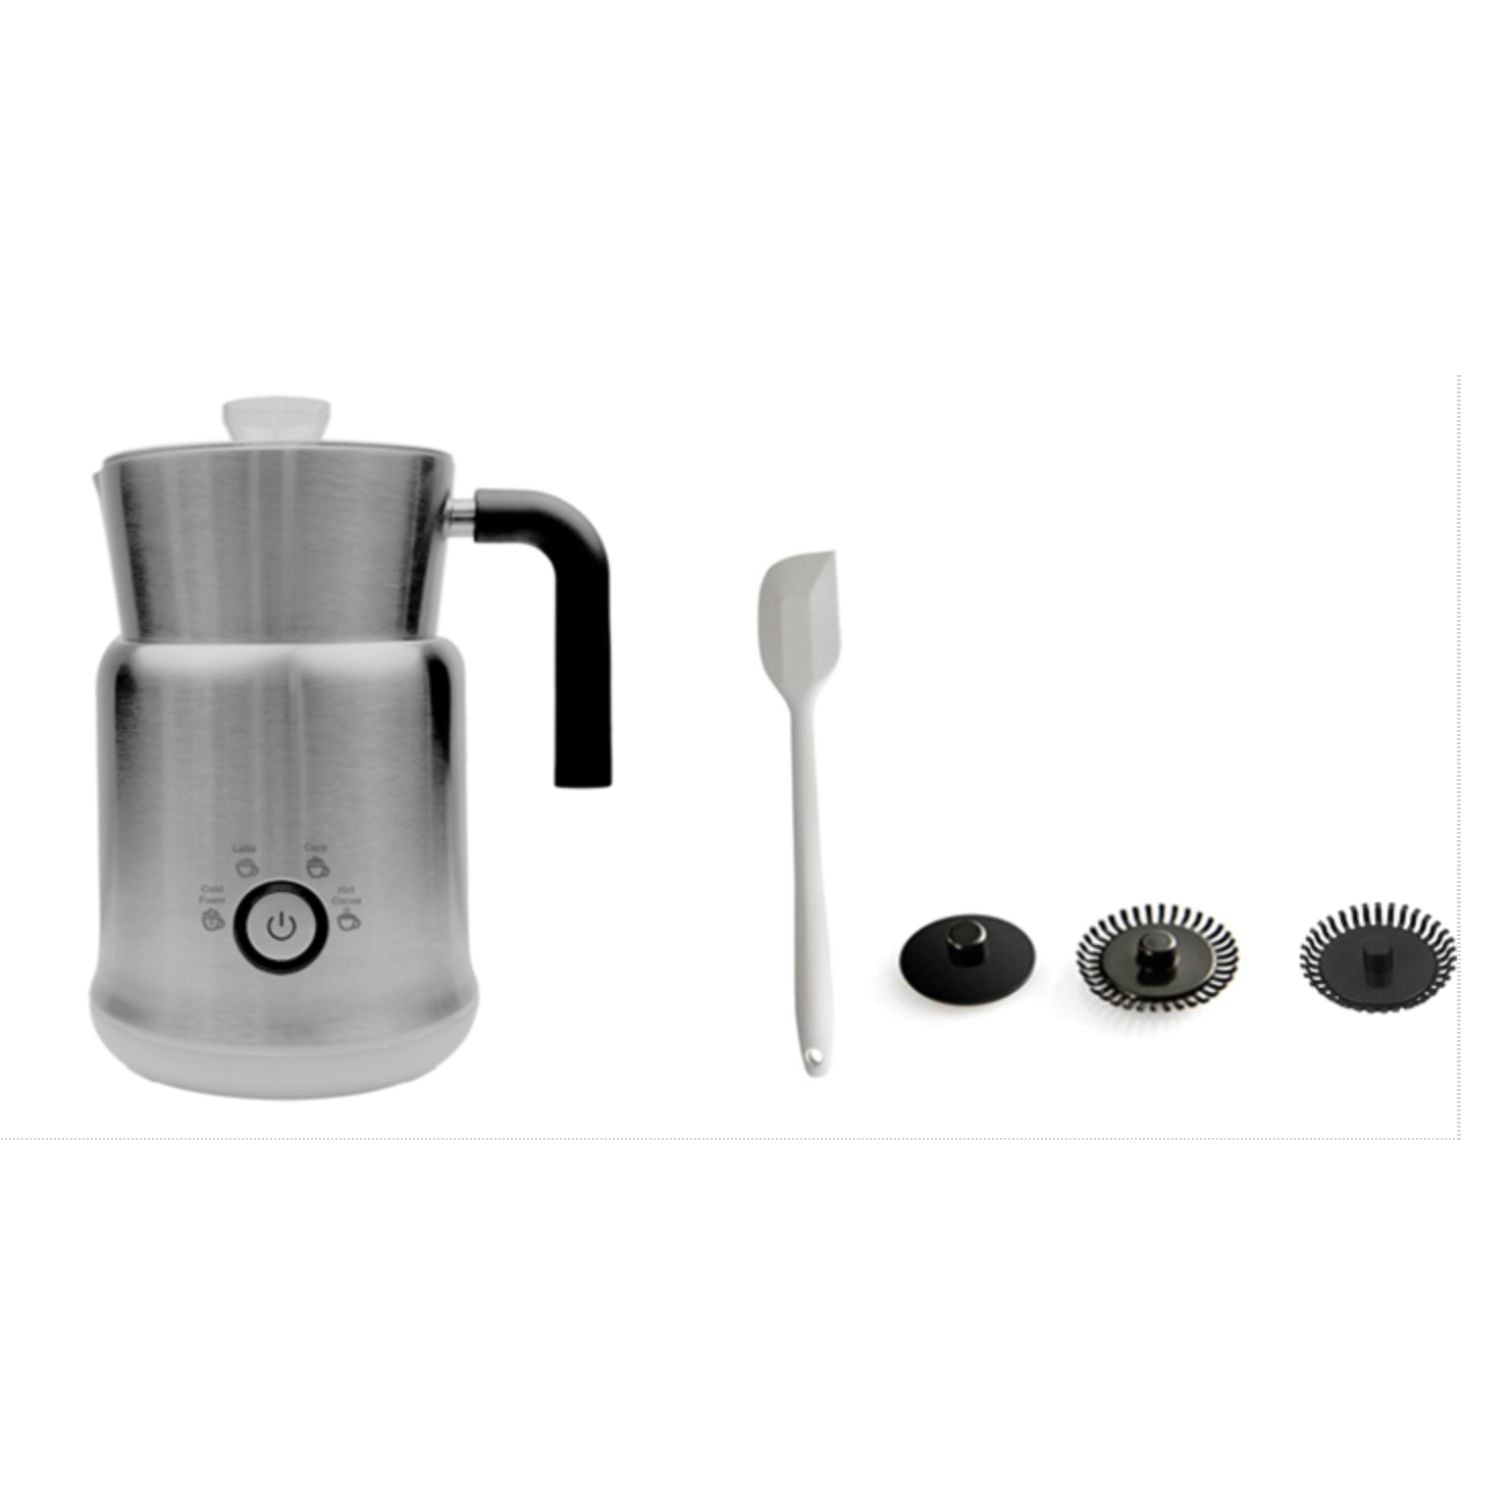 Zulay Electric Hot Chocolate Maker Machine - Powerful, Stainless Steel Hot  Chocolate Machine & Hot Cocoa Maker - 4-in-1 Detachable Milk Frother Heater